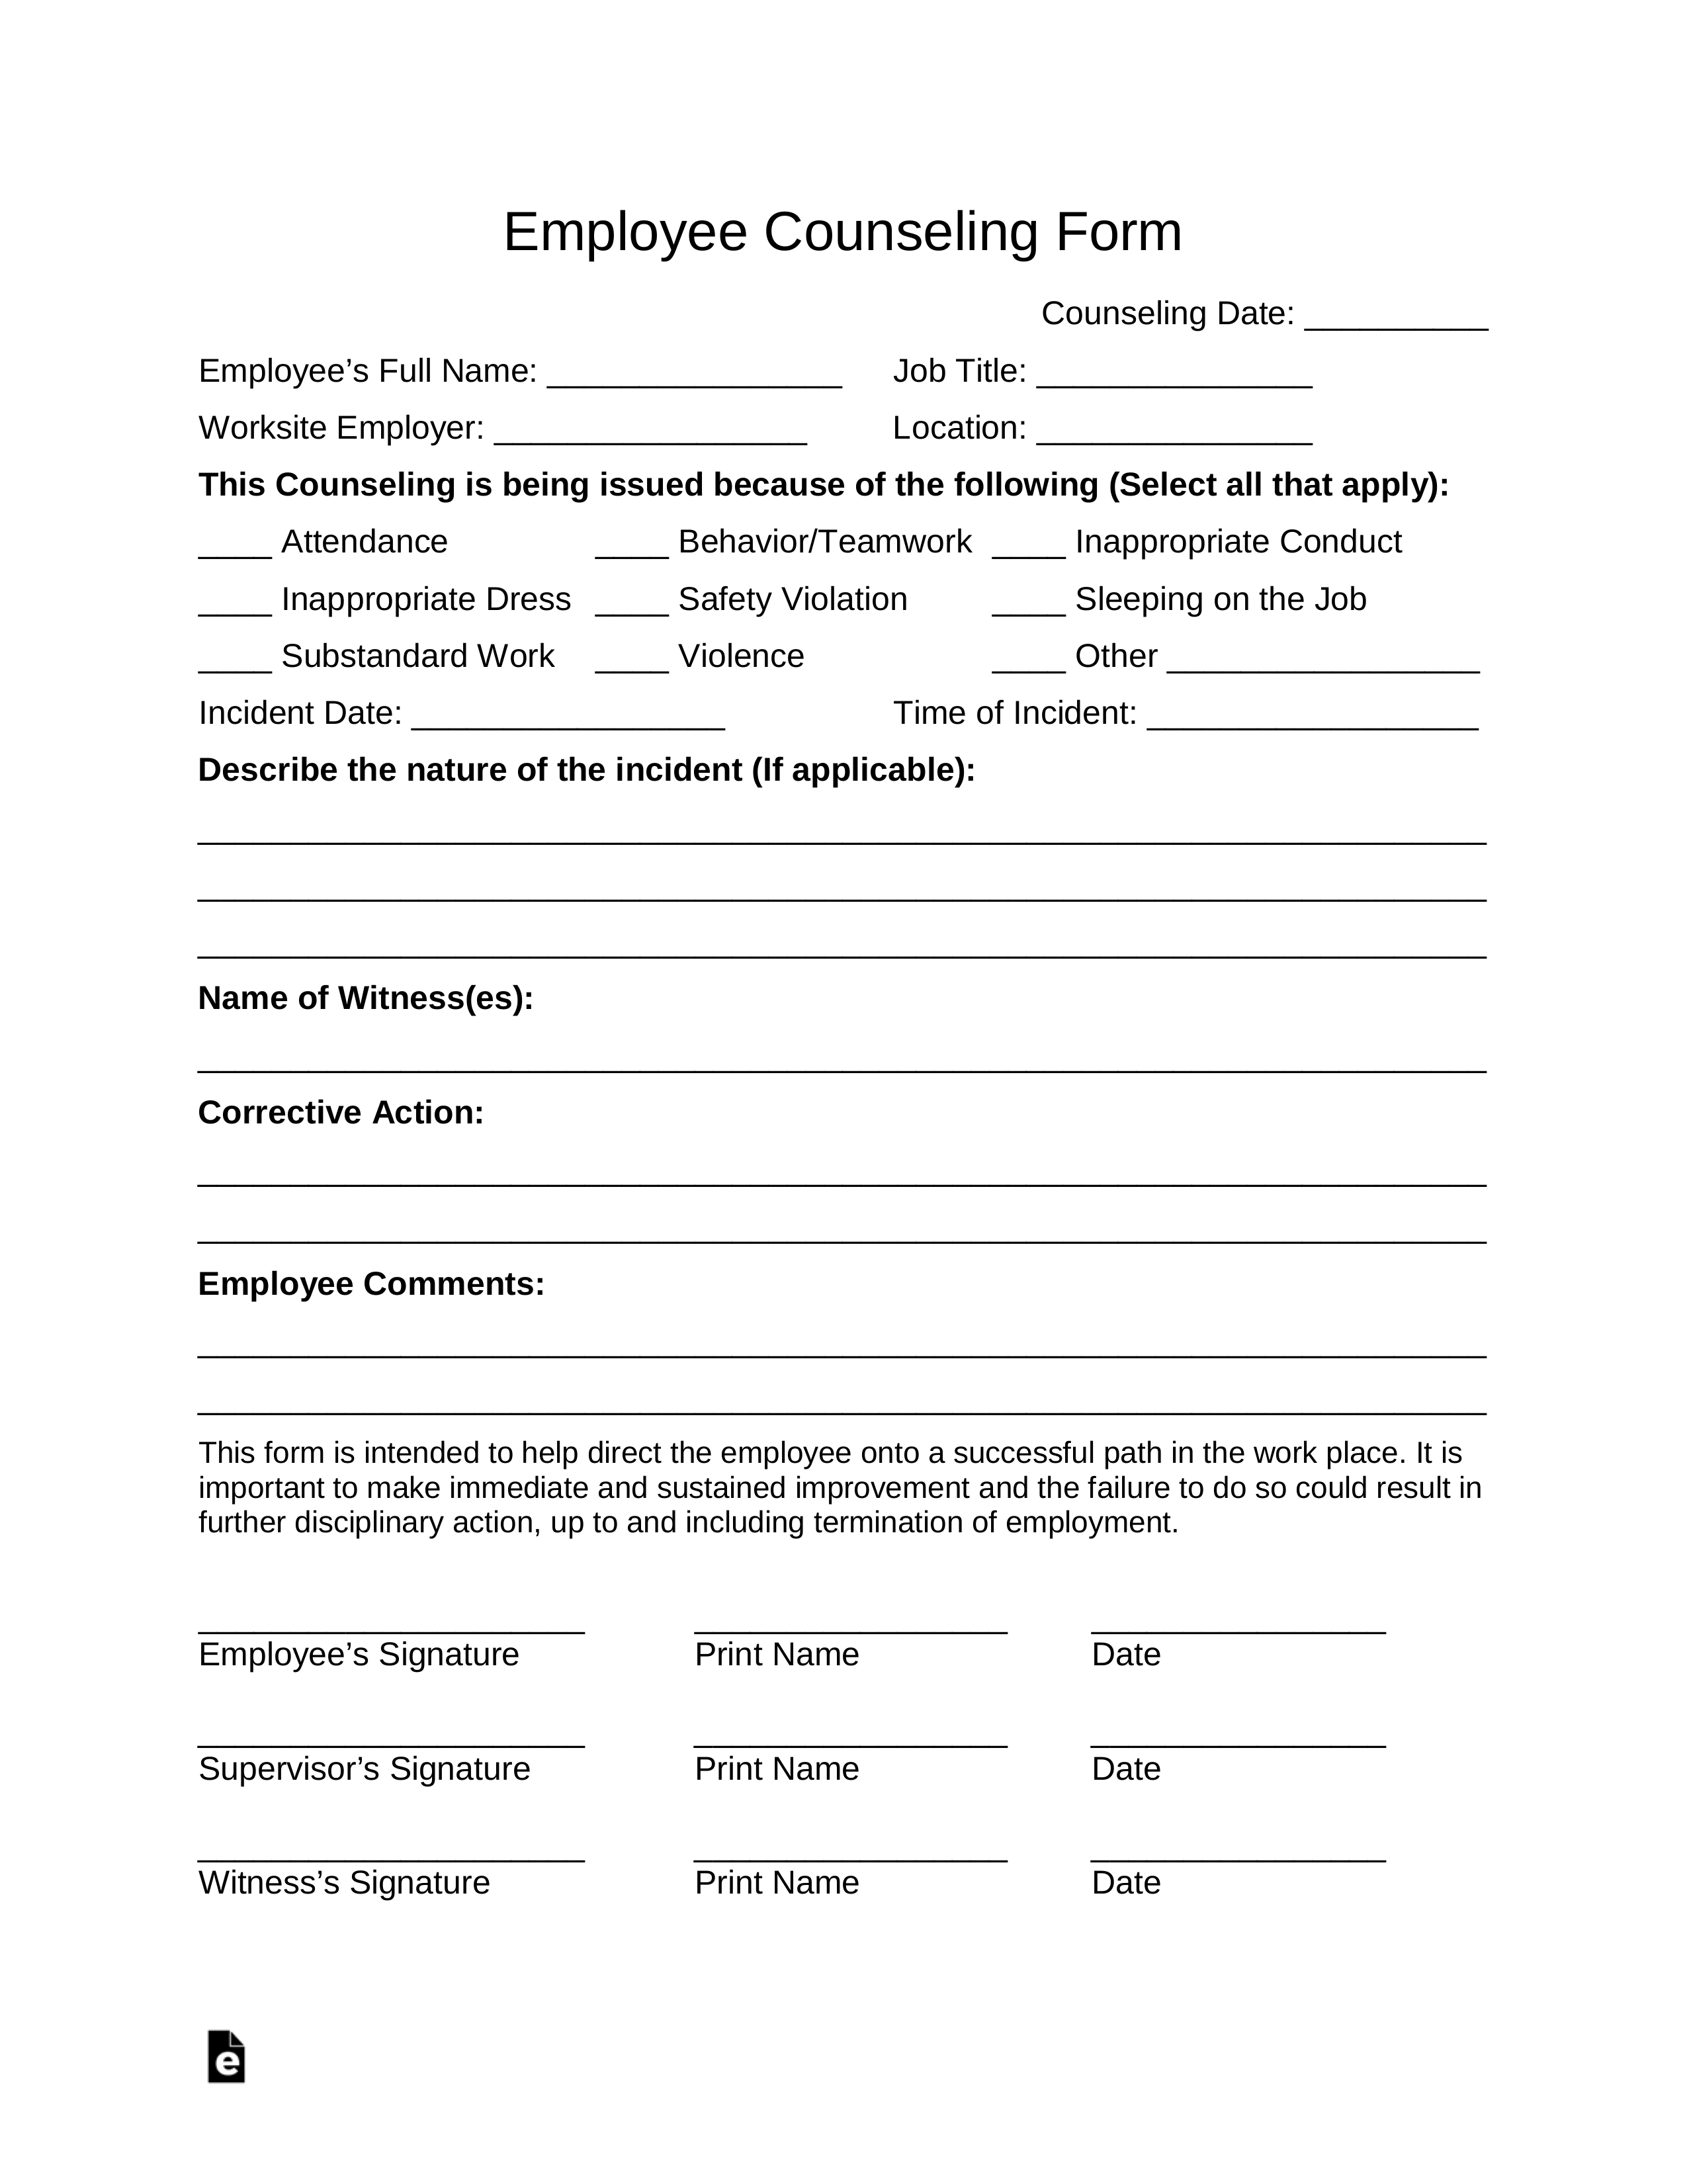 Free Employee Counseling Form Pdf Word Eforms